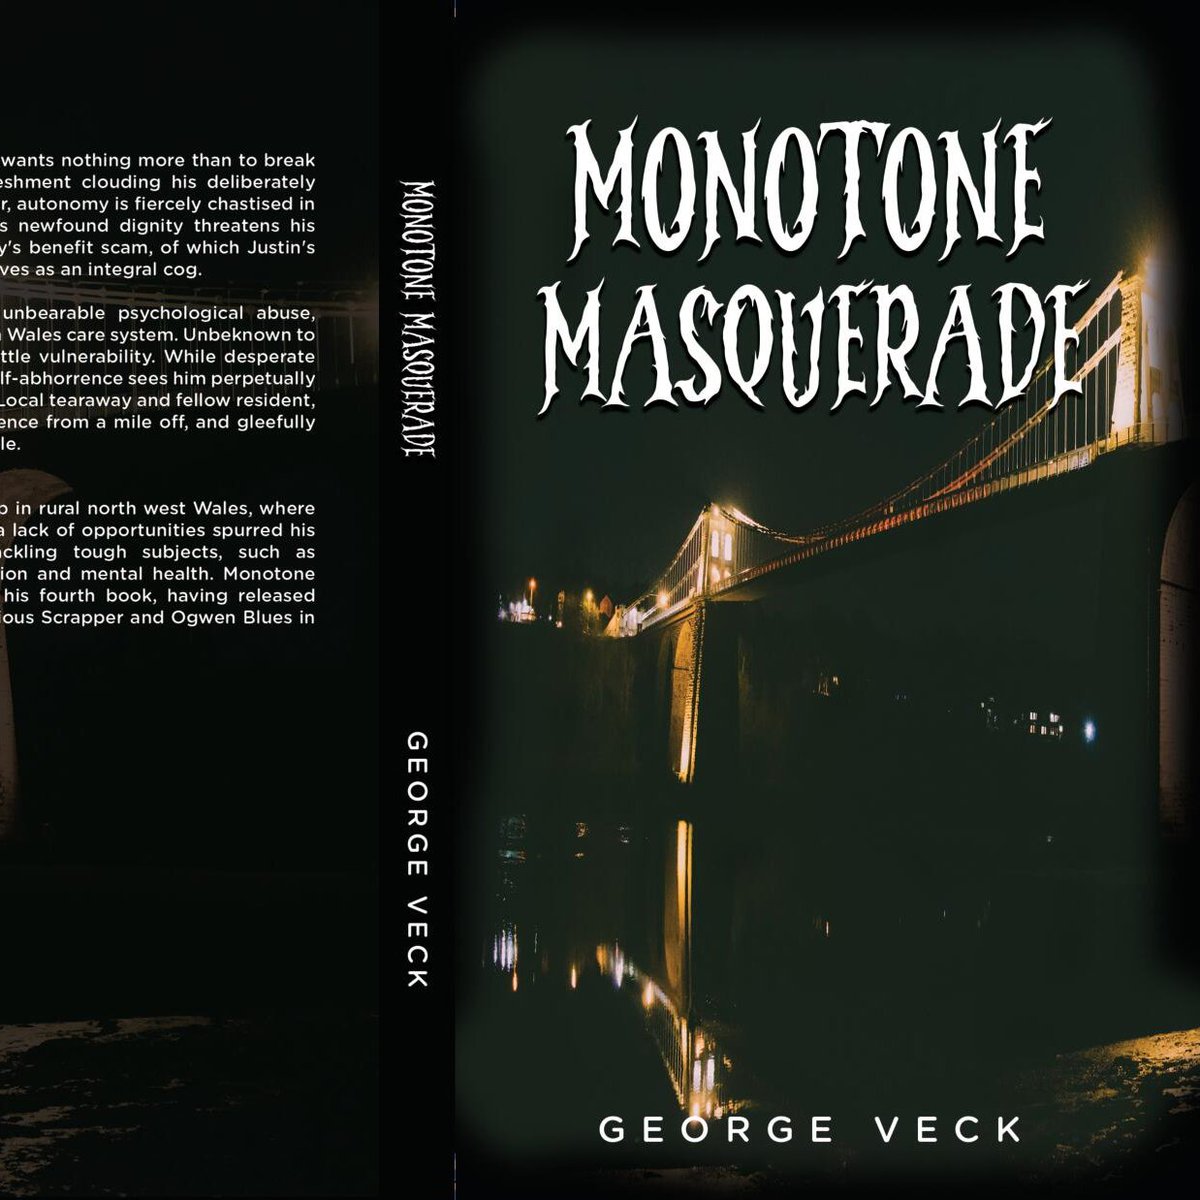 Inspired by a lifelong battle with the mental health system, and their perpetual neglect of millions, Monotone Masquerade is a gritty north Wales set crime drama.

Free for a limited time!

#freebook #psychologicaldrama #crimedrama #booksworthreading

amazon.co.uk/Monotone-Masqu…